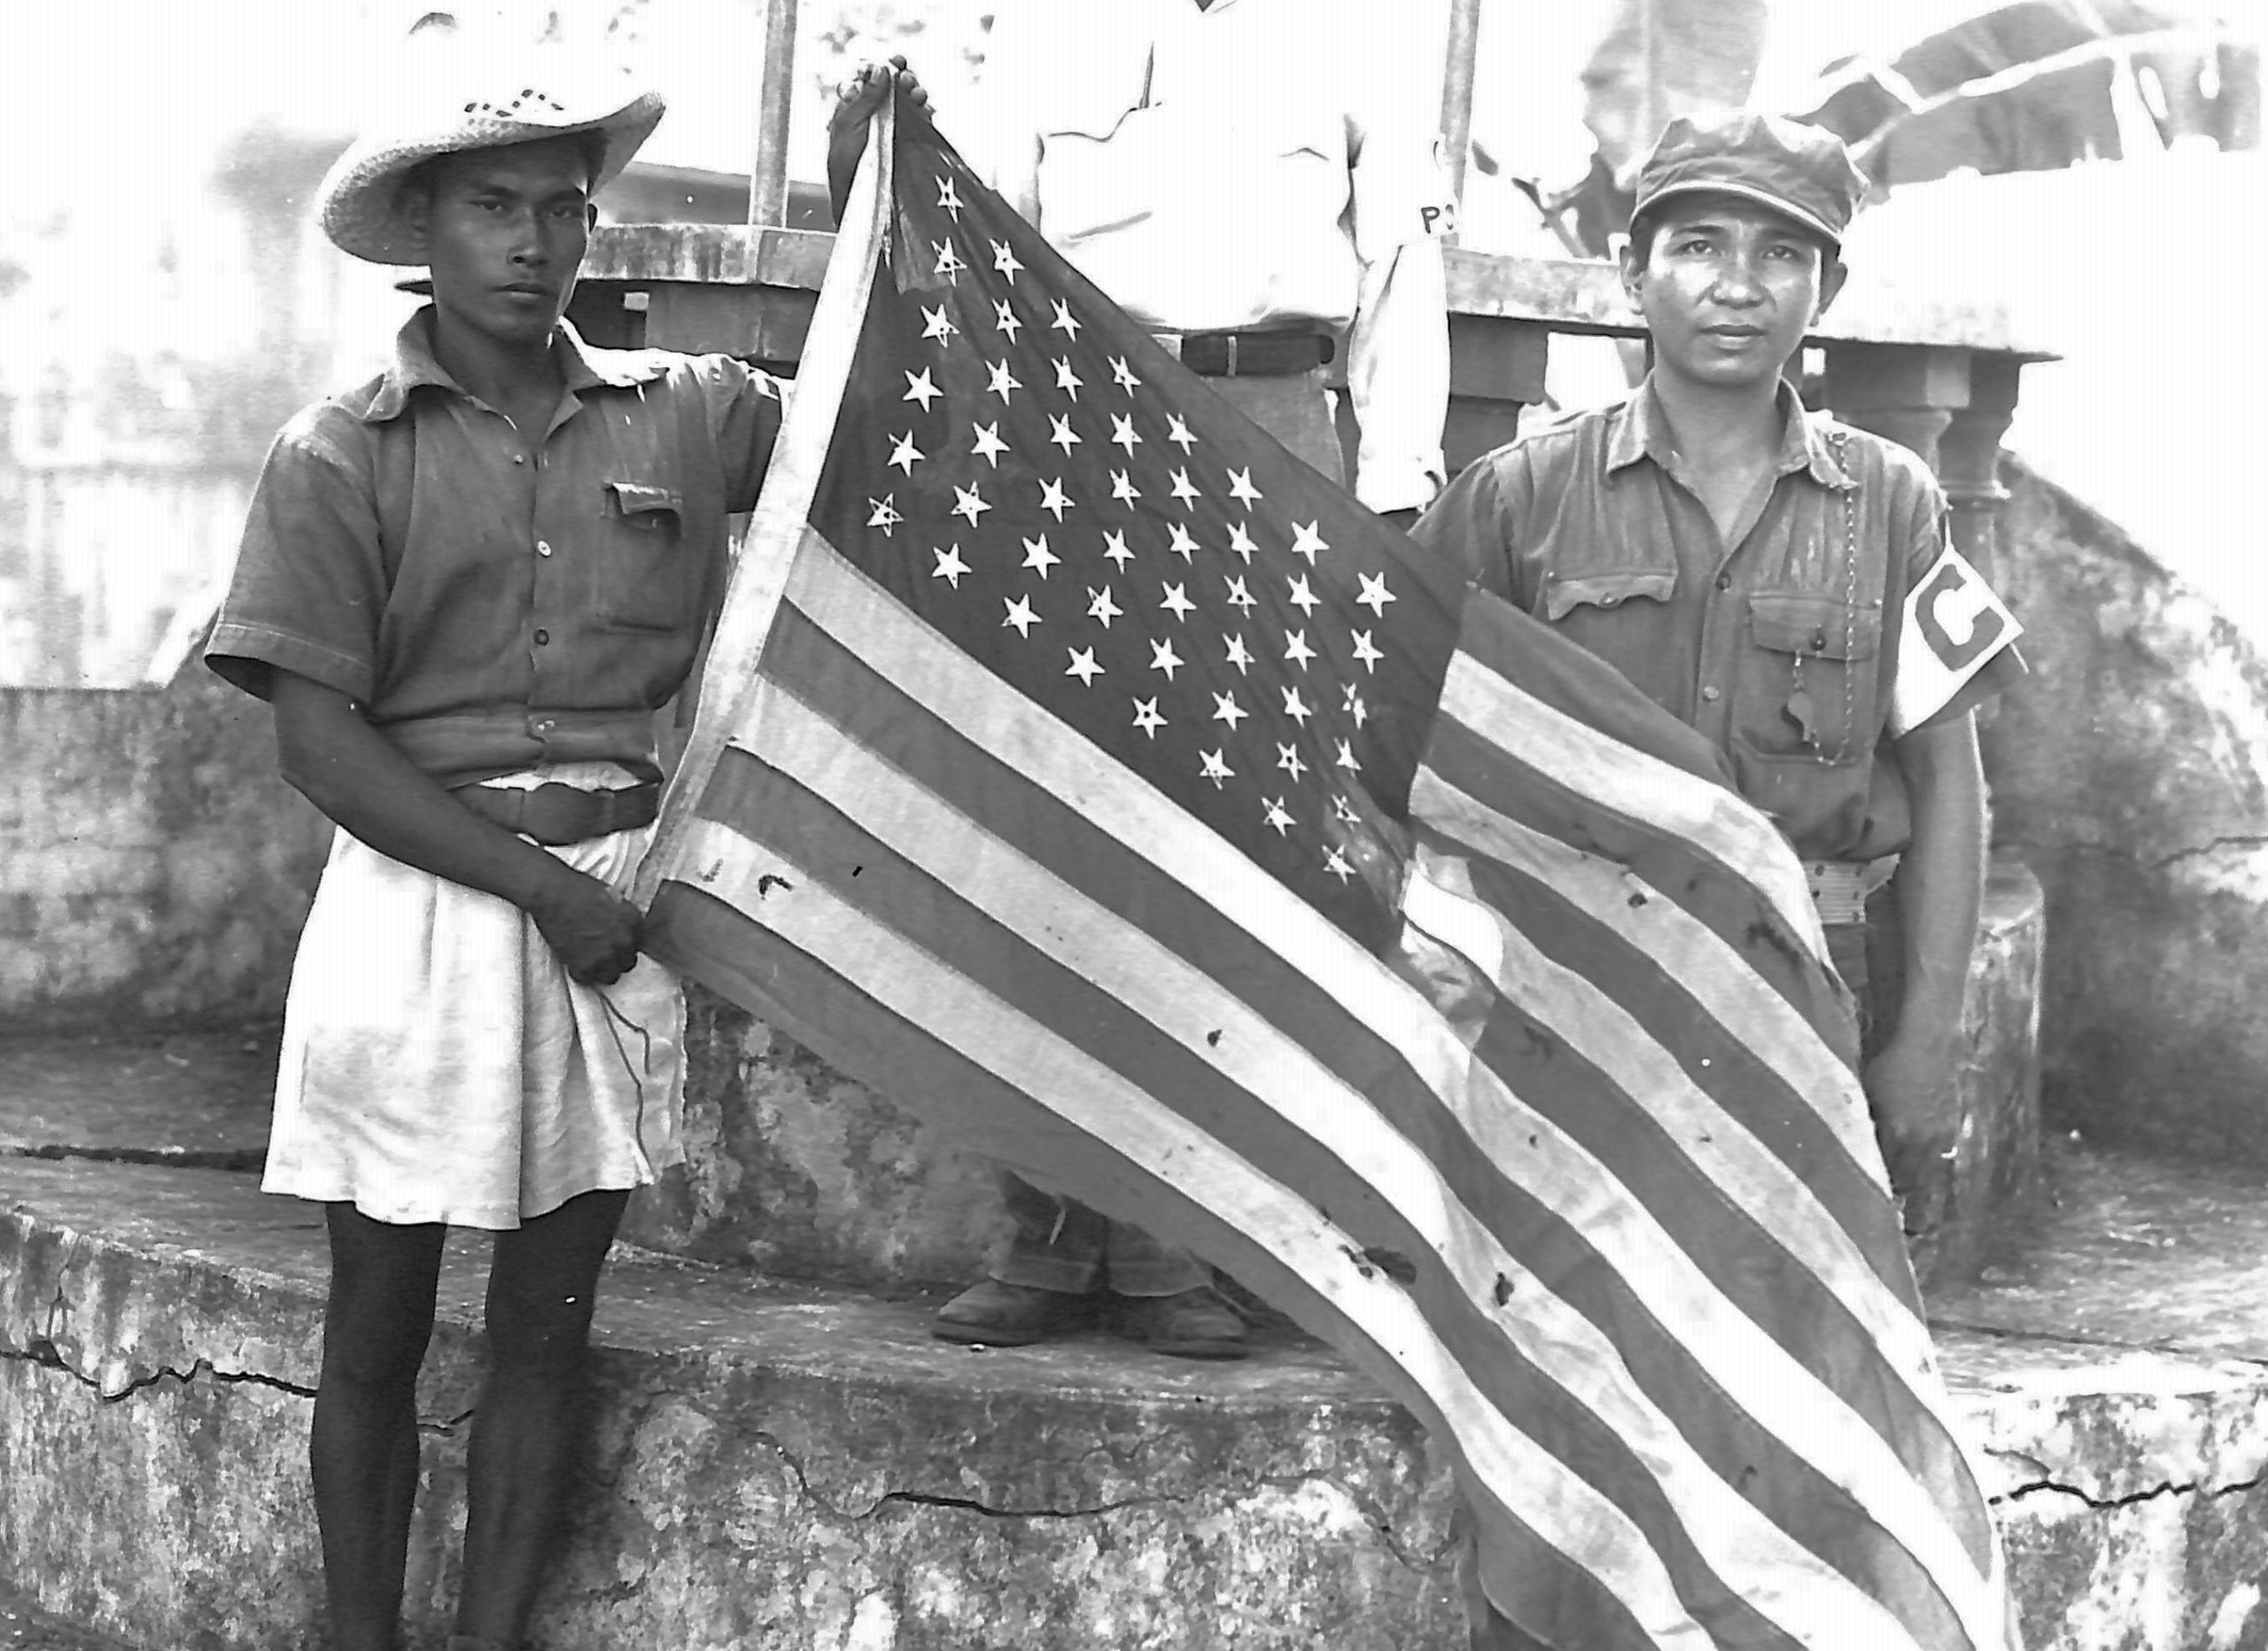 Photo of Filipino soldiers posing with American flag